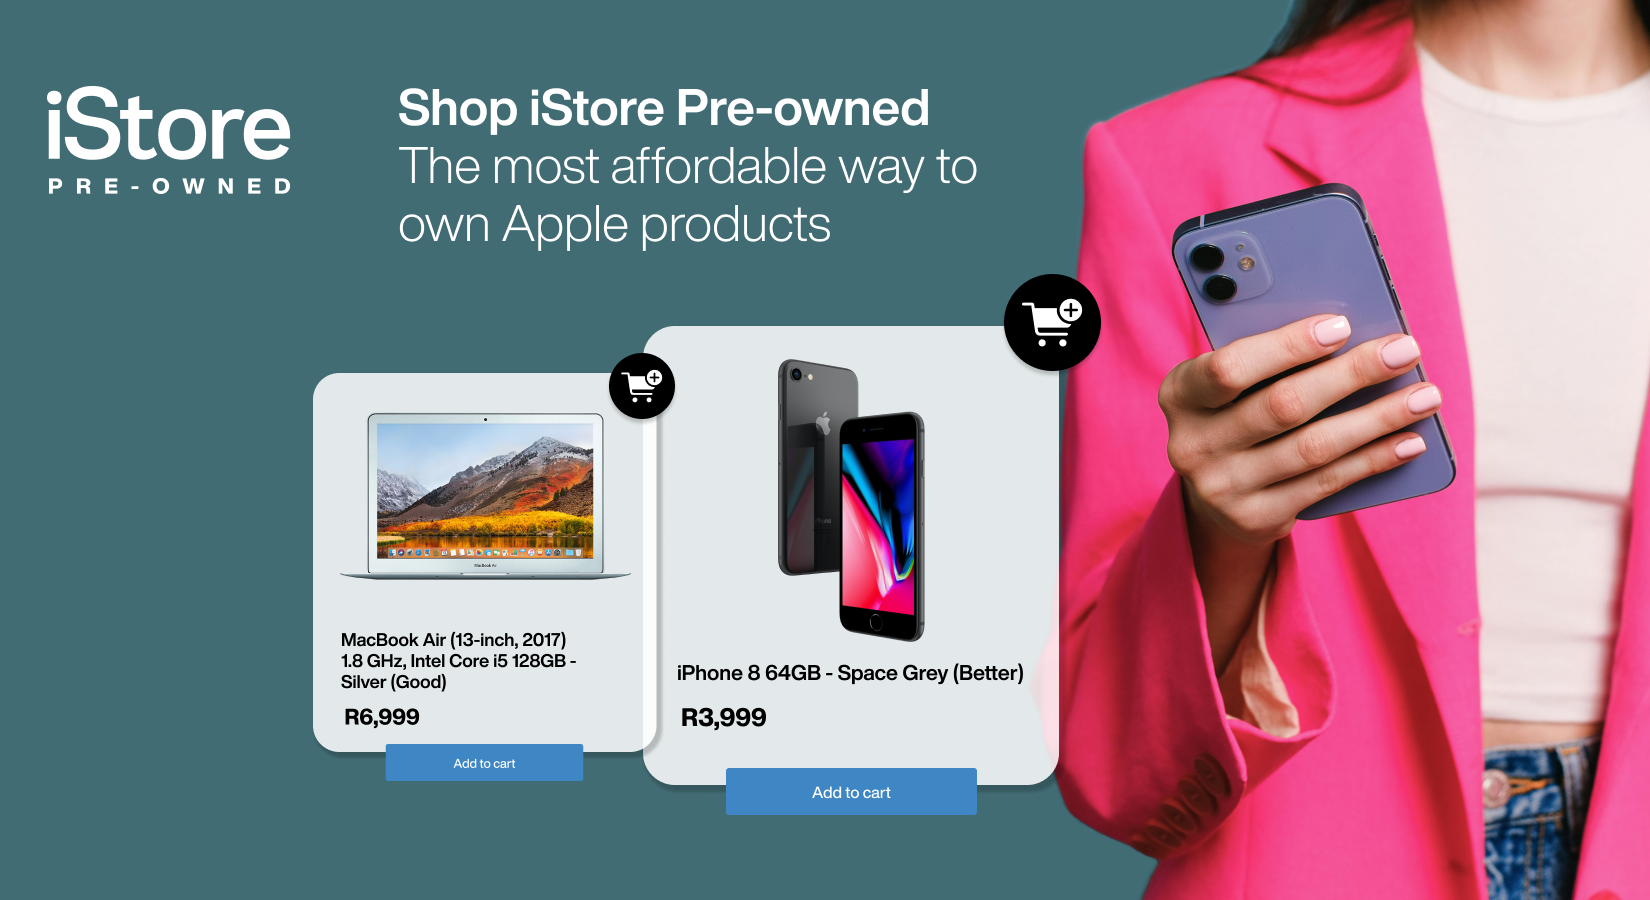 Ready to make the Switch? iStore Pre-Owned has you covered.